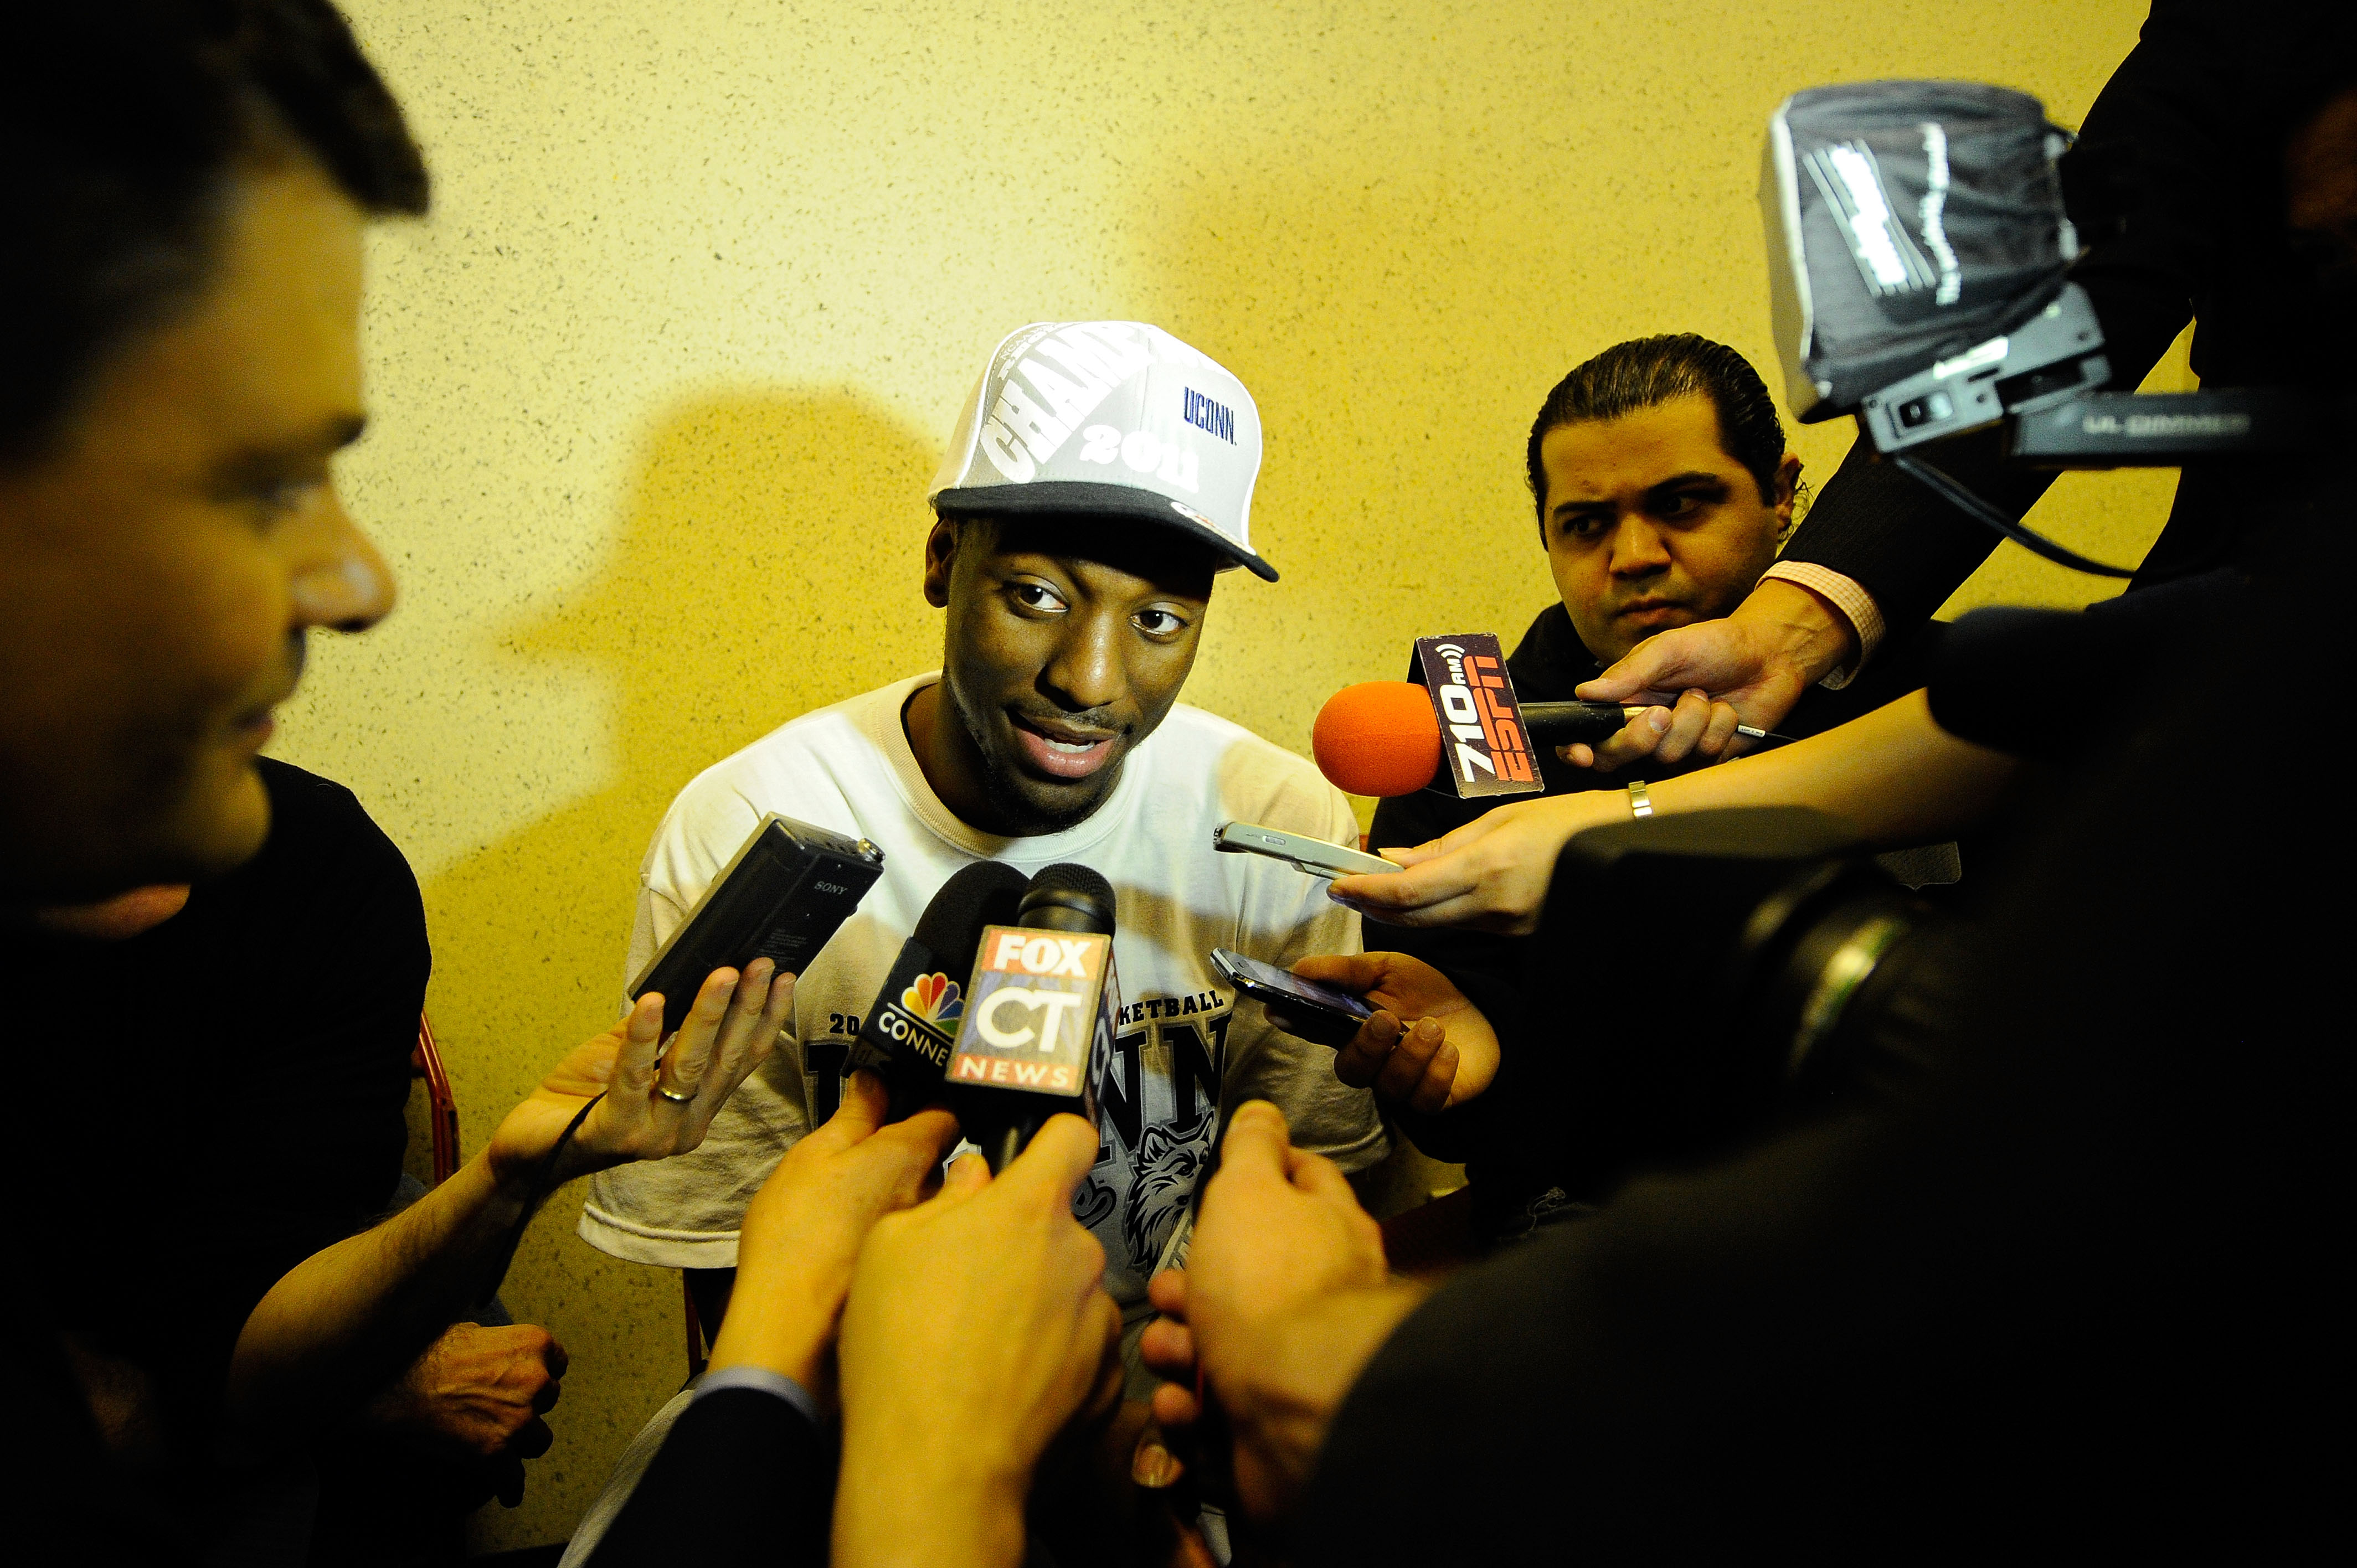 ANAHEIM, CA - MARCH 26:  Kemba Walker #15 of the Connecticut Huskies talks to the media in the locker room after defeating the Arizona Wildcats during the west regional final of the 2011 NCAA men's basketball tournament at the Honda Center on March 26, 20